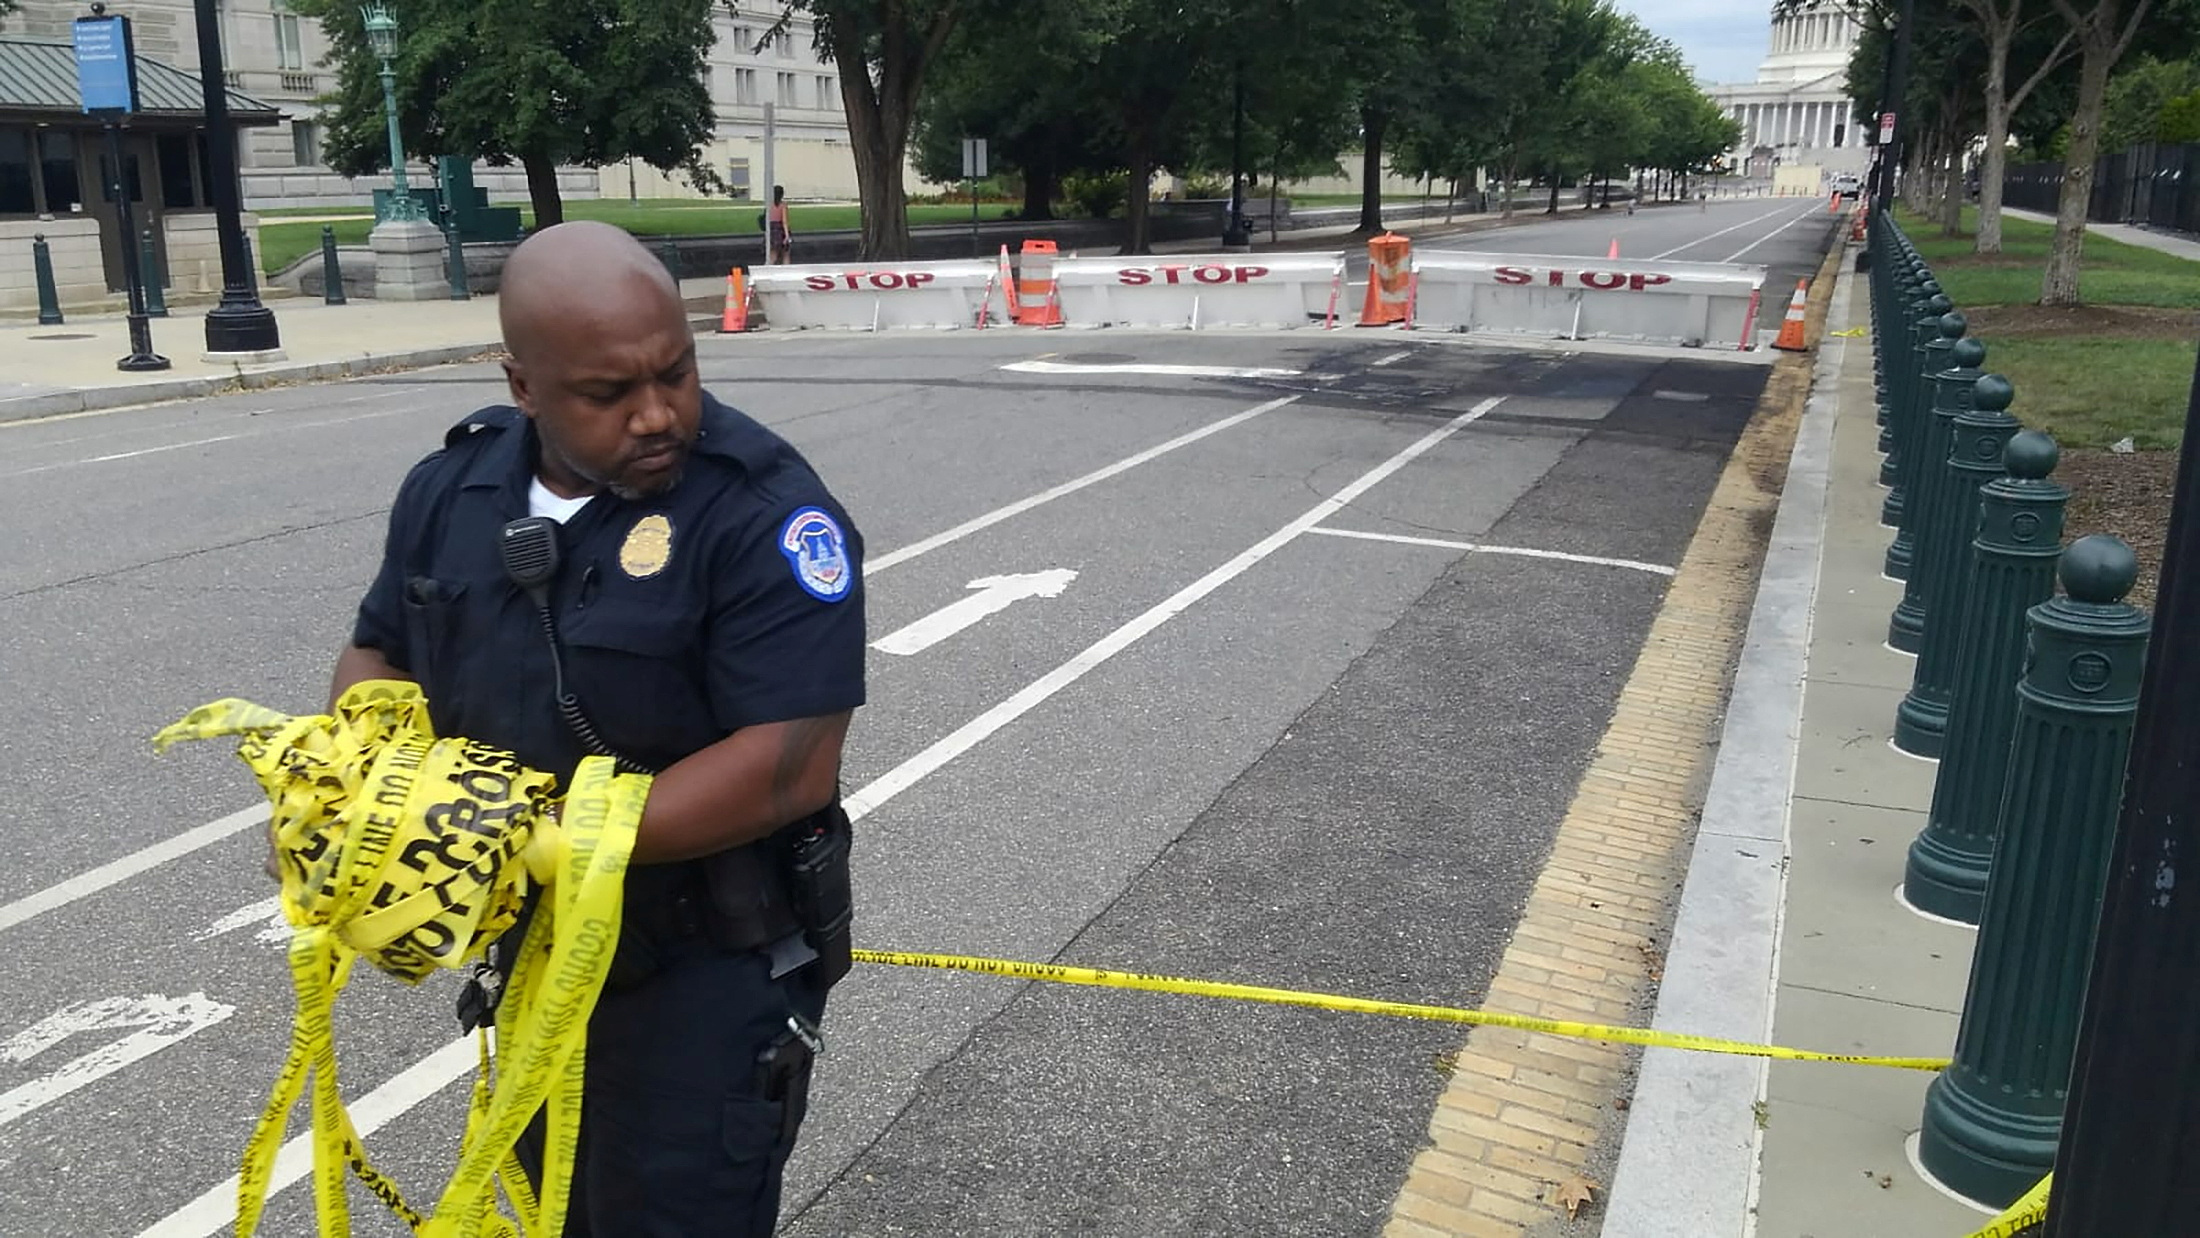 U.S. Capitol Police officer removes security tape in Washington